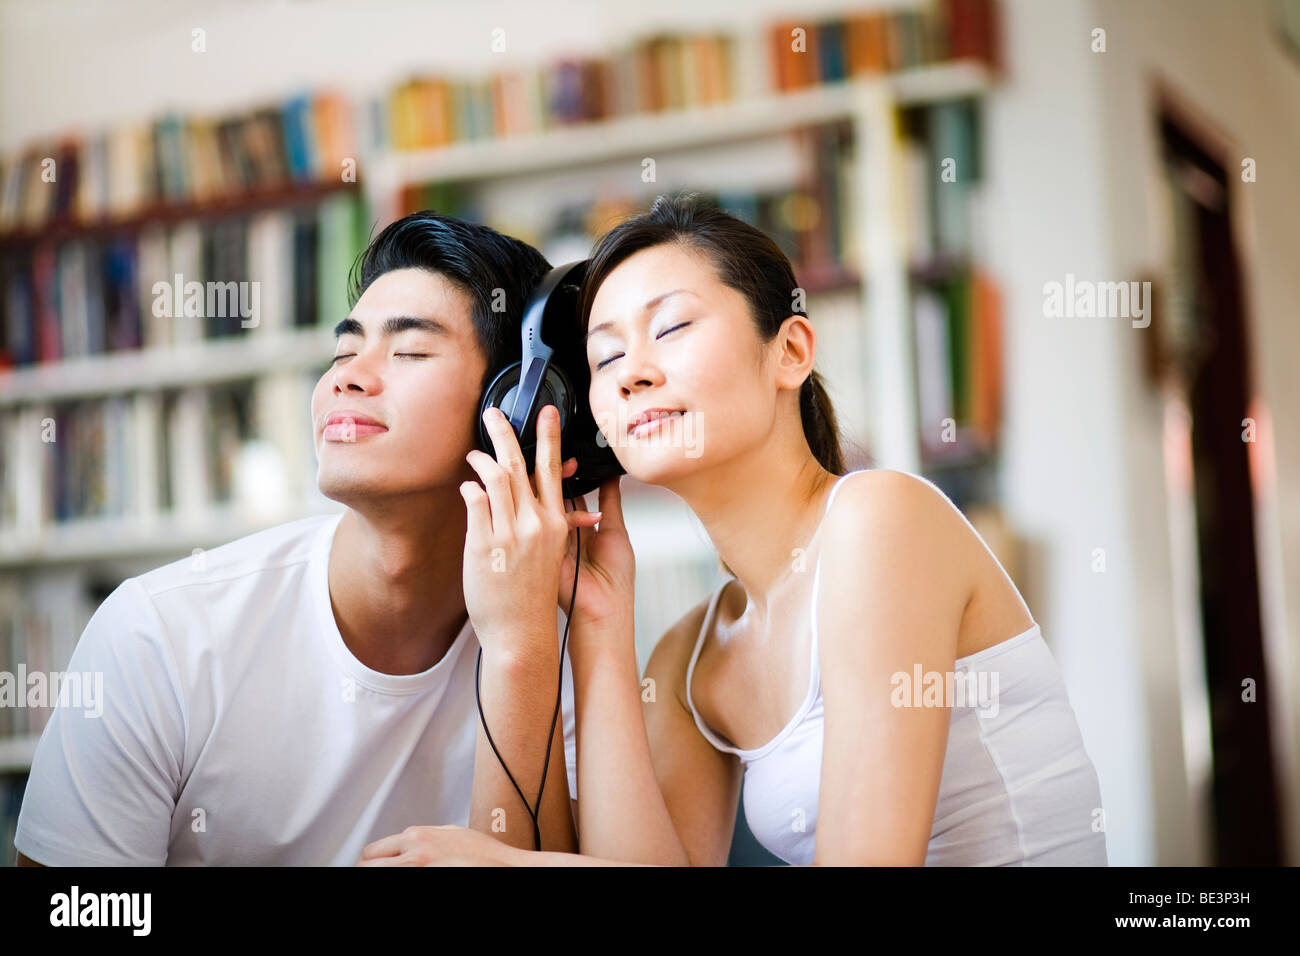 Asian couple listening to music together with headphones Stock Photo